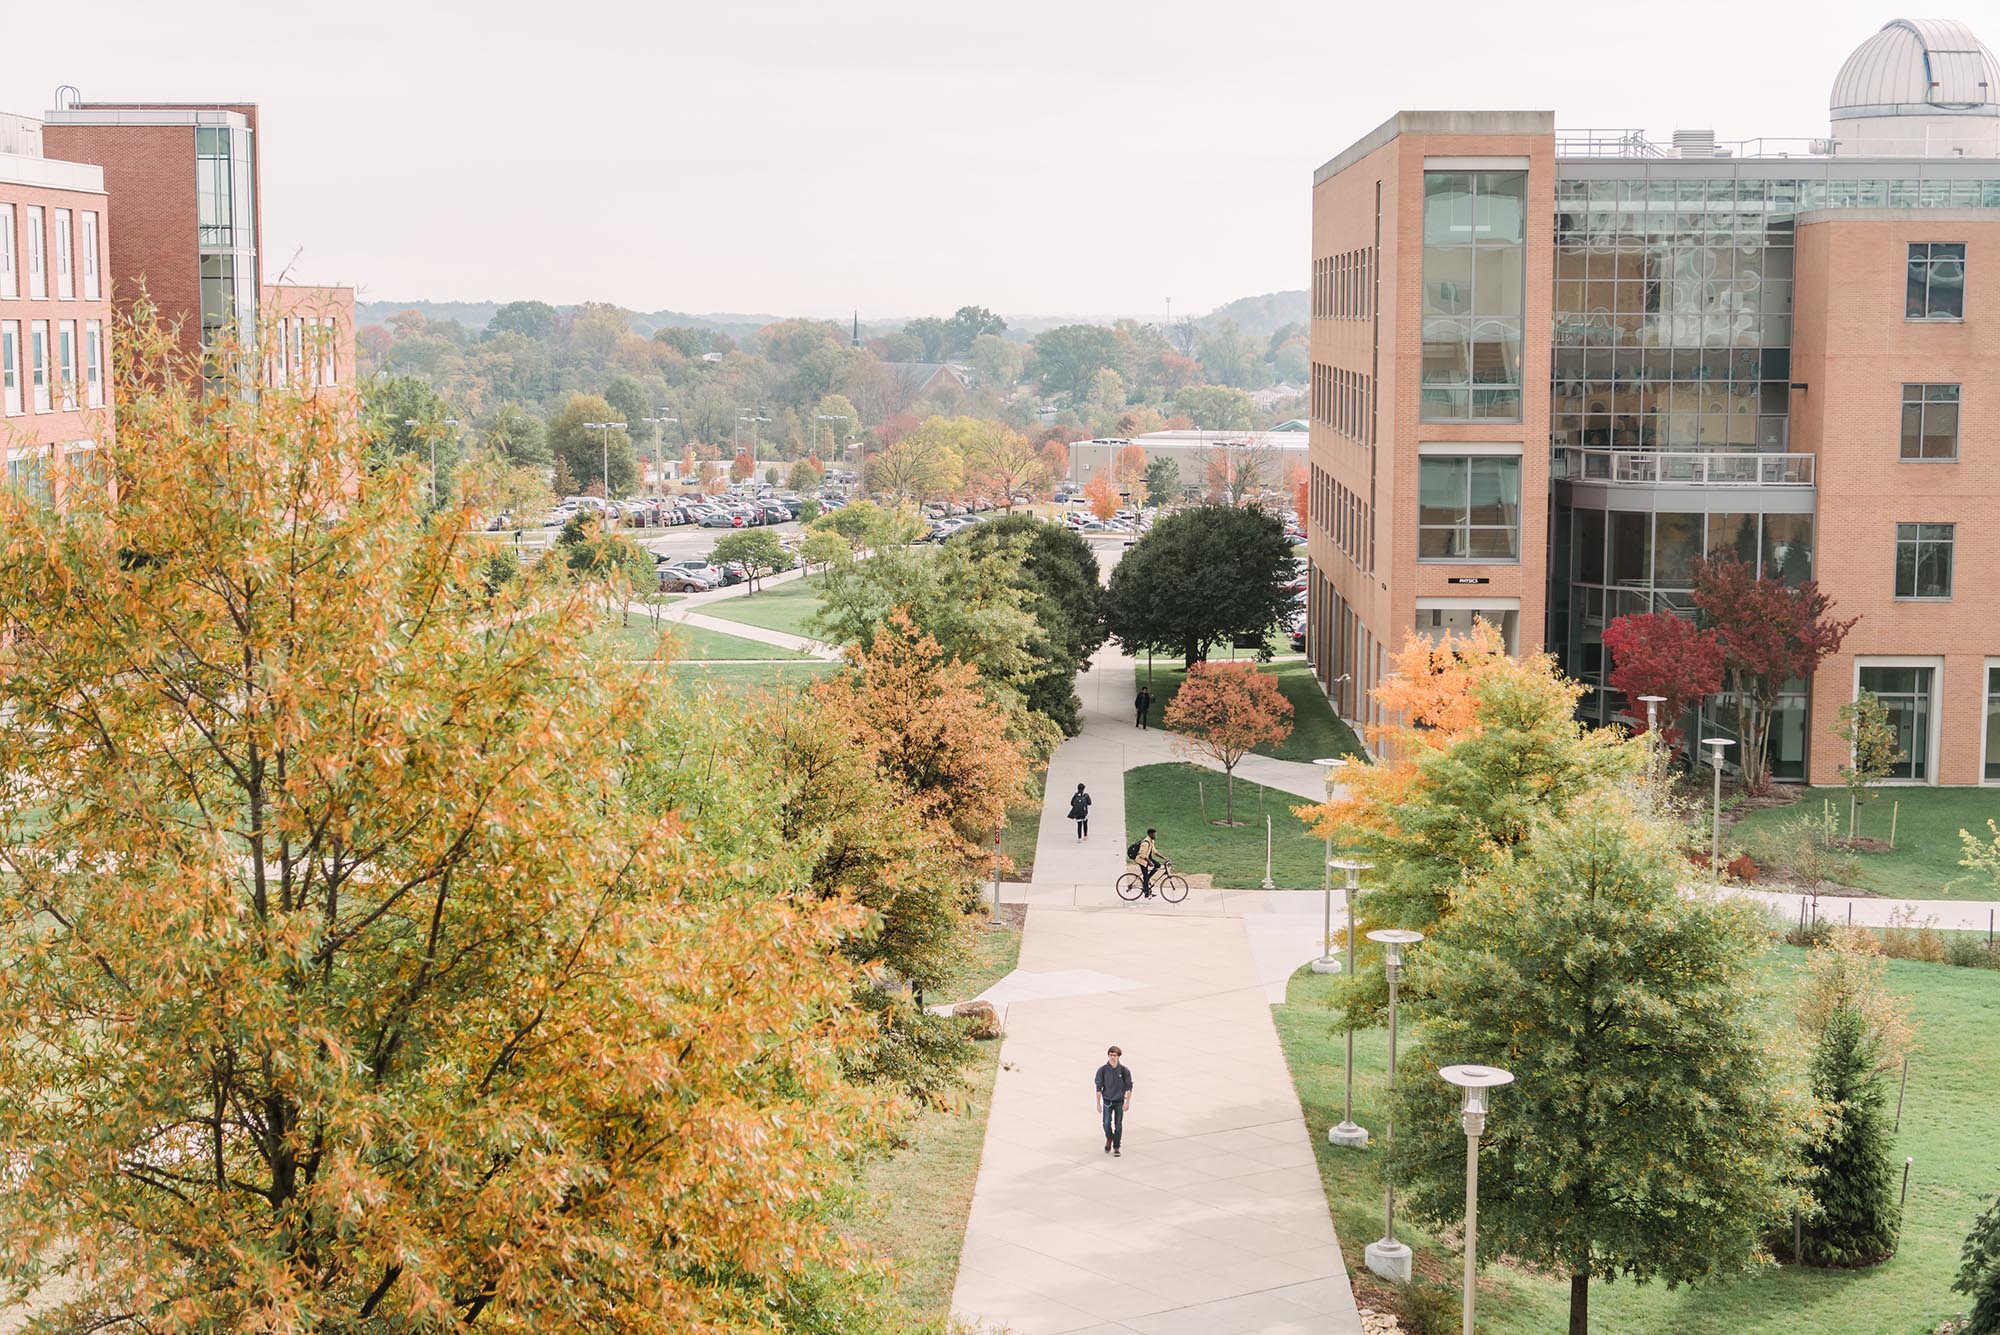 View overlooking campus during the fall season. Students can be seen walking and riding their bike to get around.